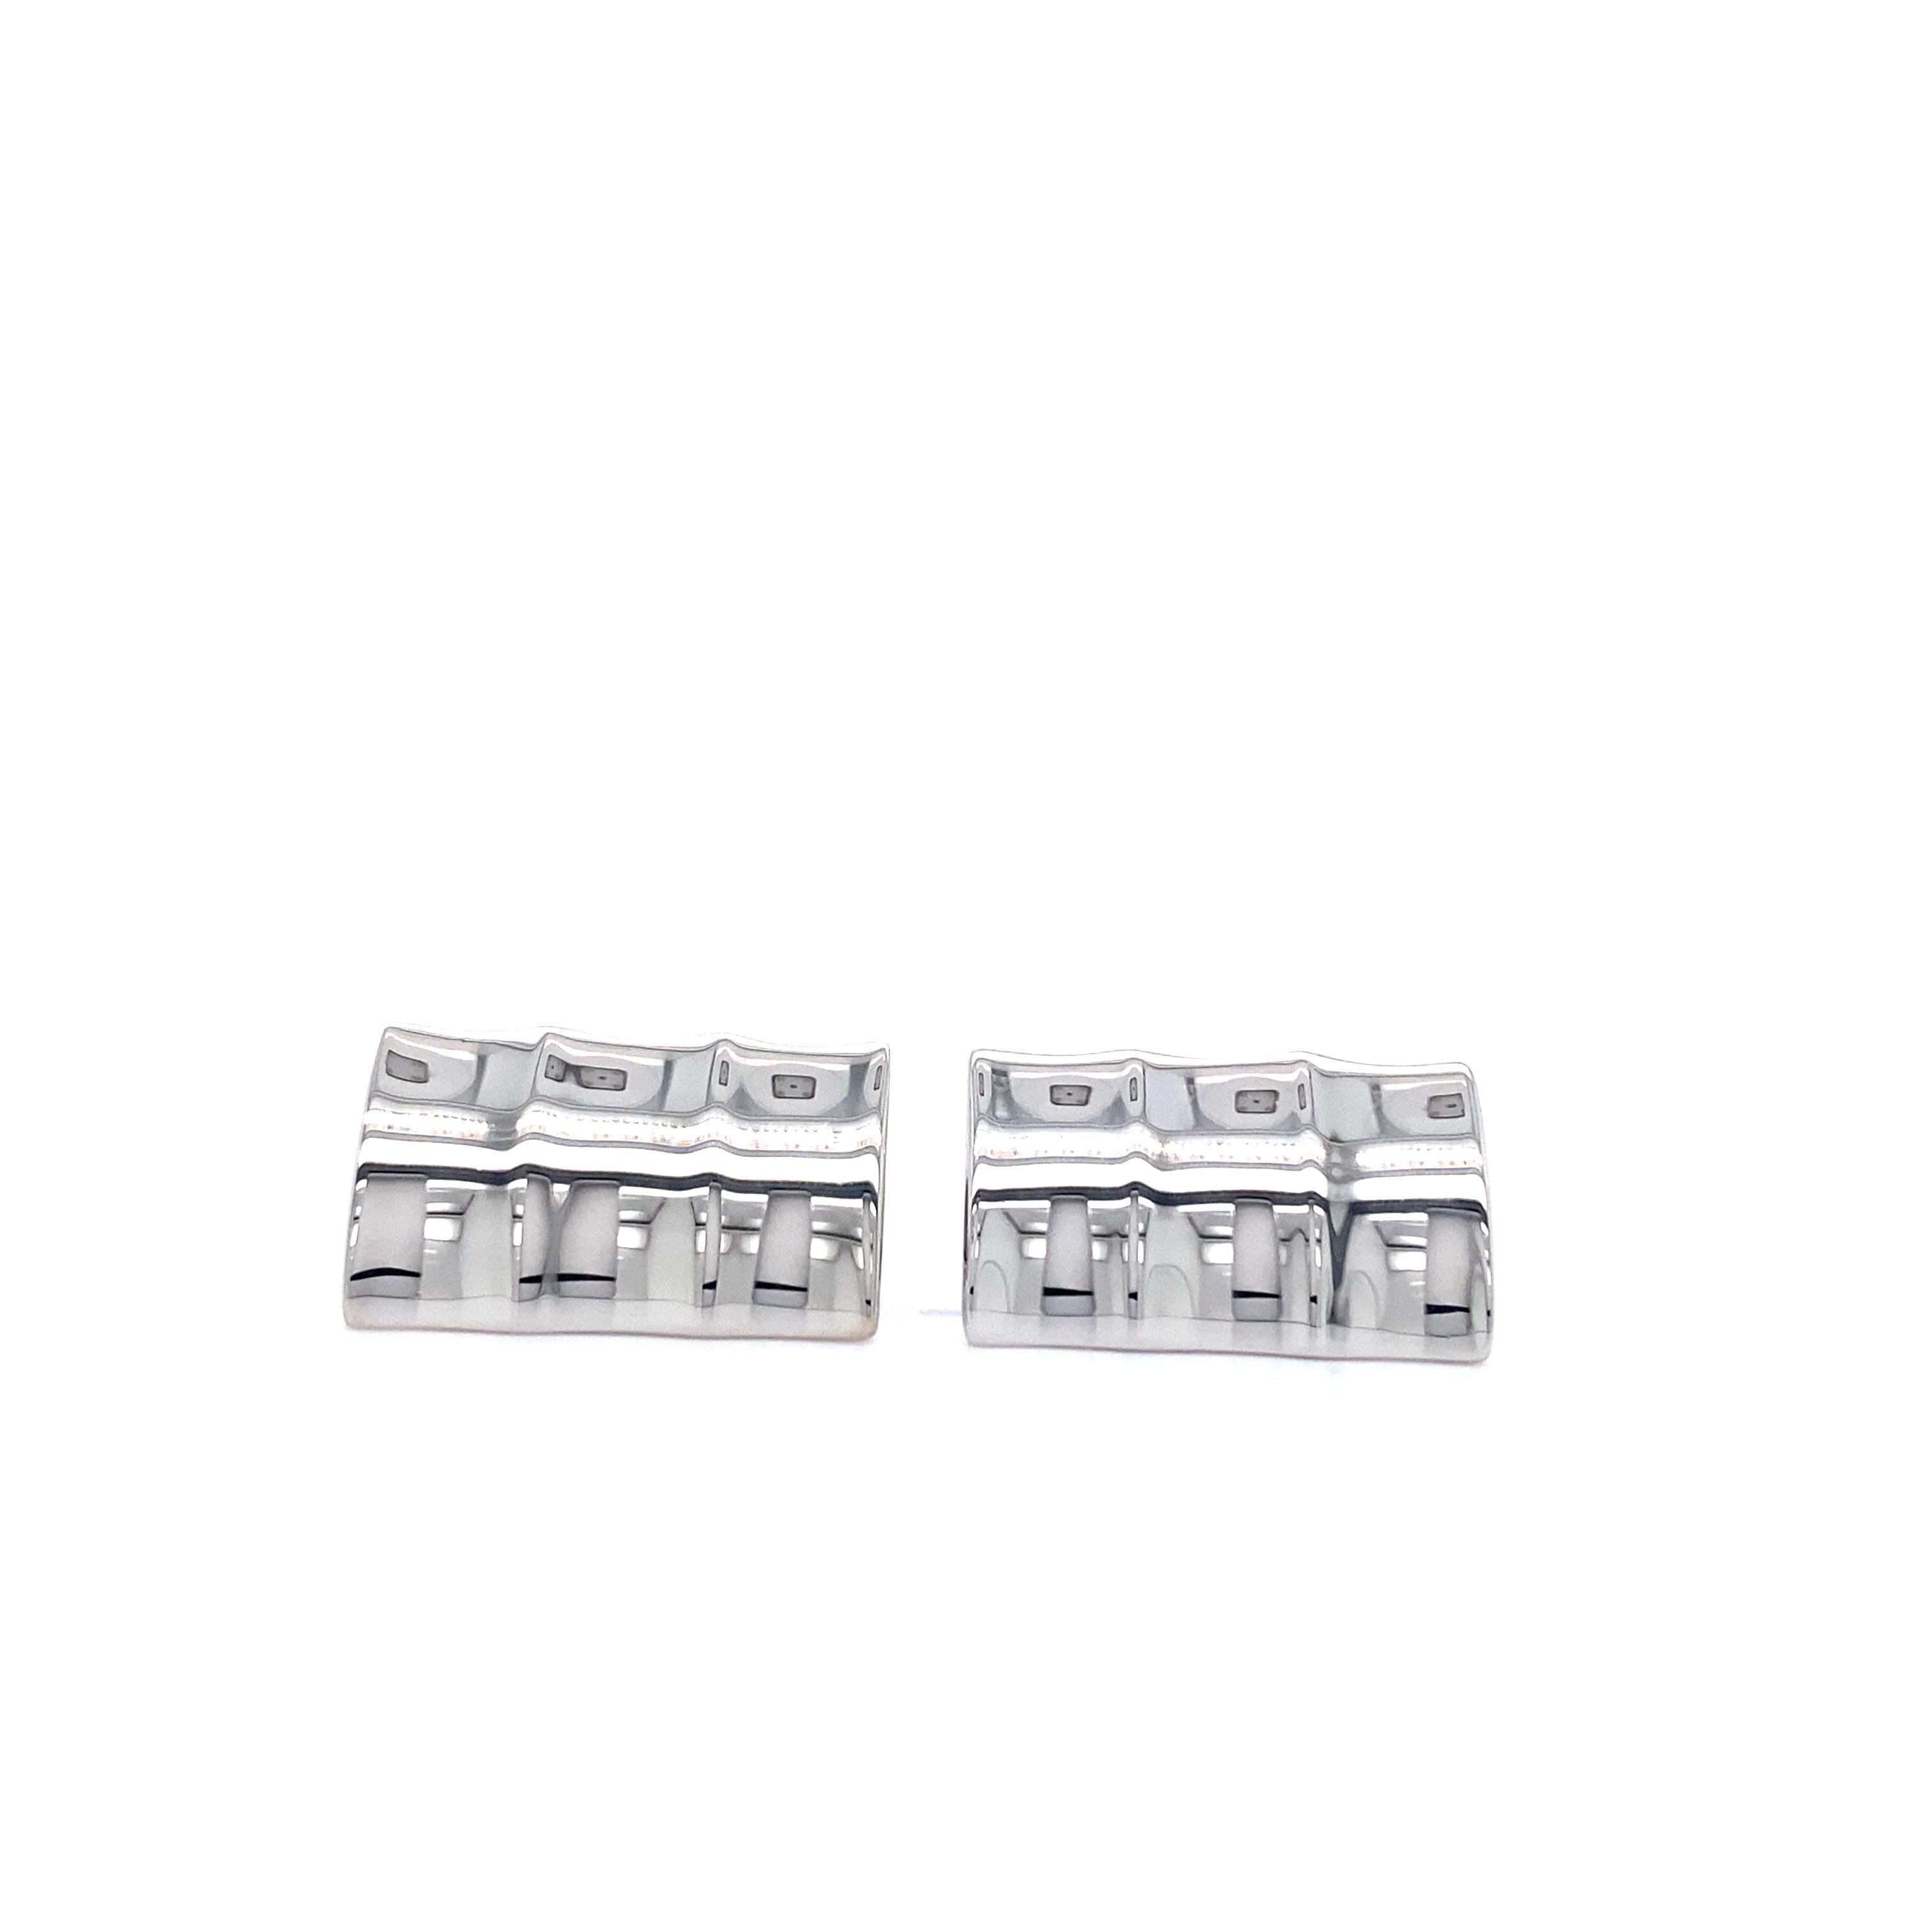 Fluted Rectangular Cufflinks in Solid 925 Sterling Silver, Rhodium Plated by Victor Mayer, 19 mm x 12 mm
Cufflinks made in the workshop of VICTOR MAYER in Pforzheim, Germany. The quality meets the highest standards: solid execution with a coating of